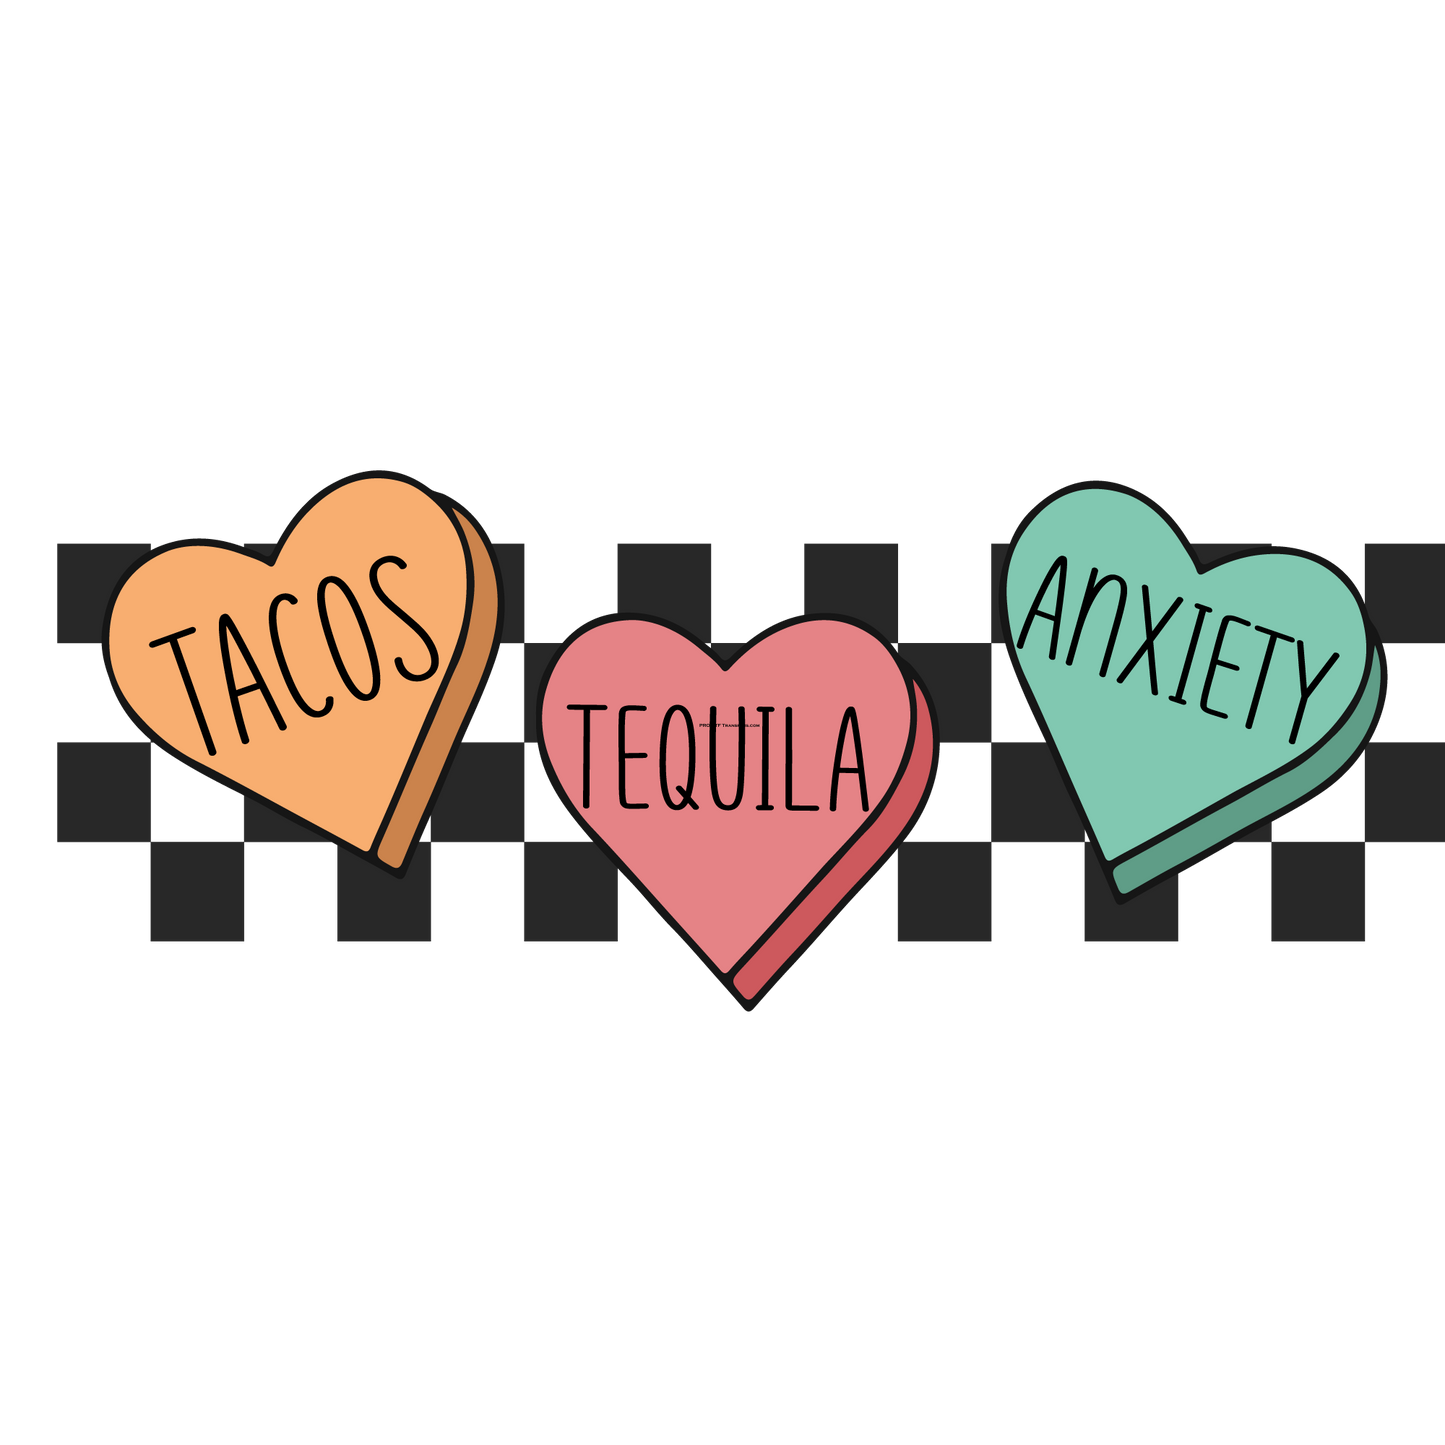 Tacos Tequila Full Color Transfer - Pro DTF Transfers